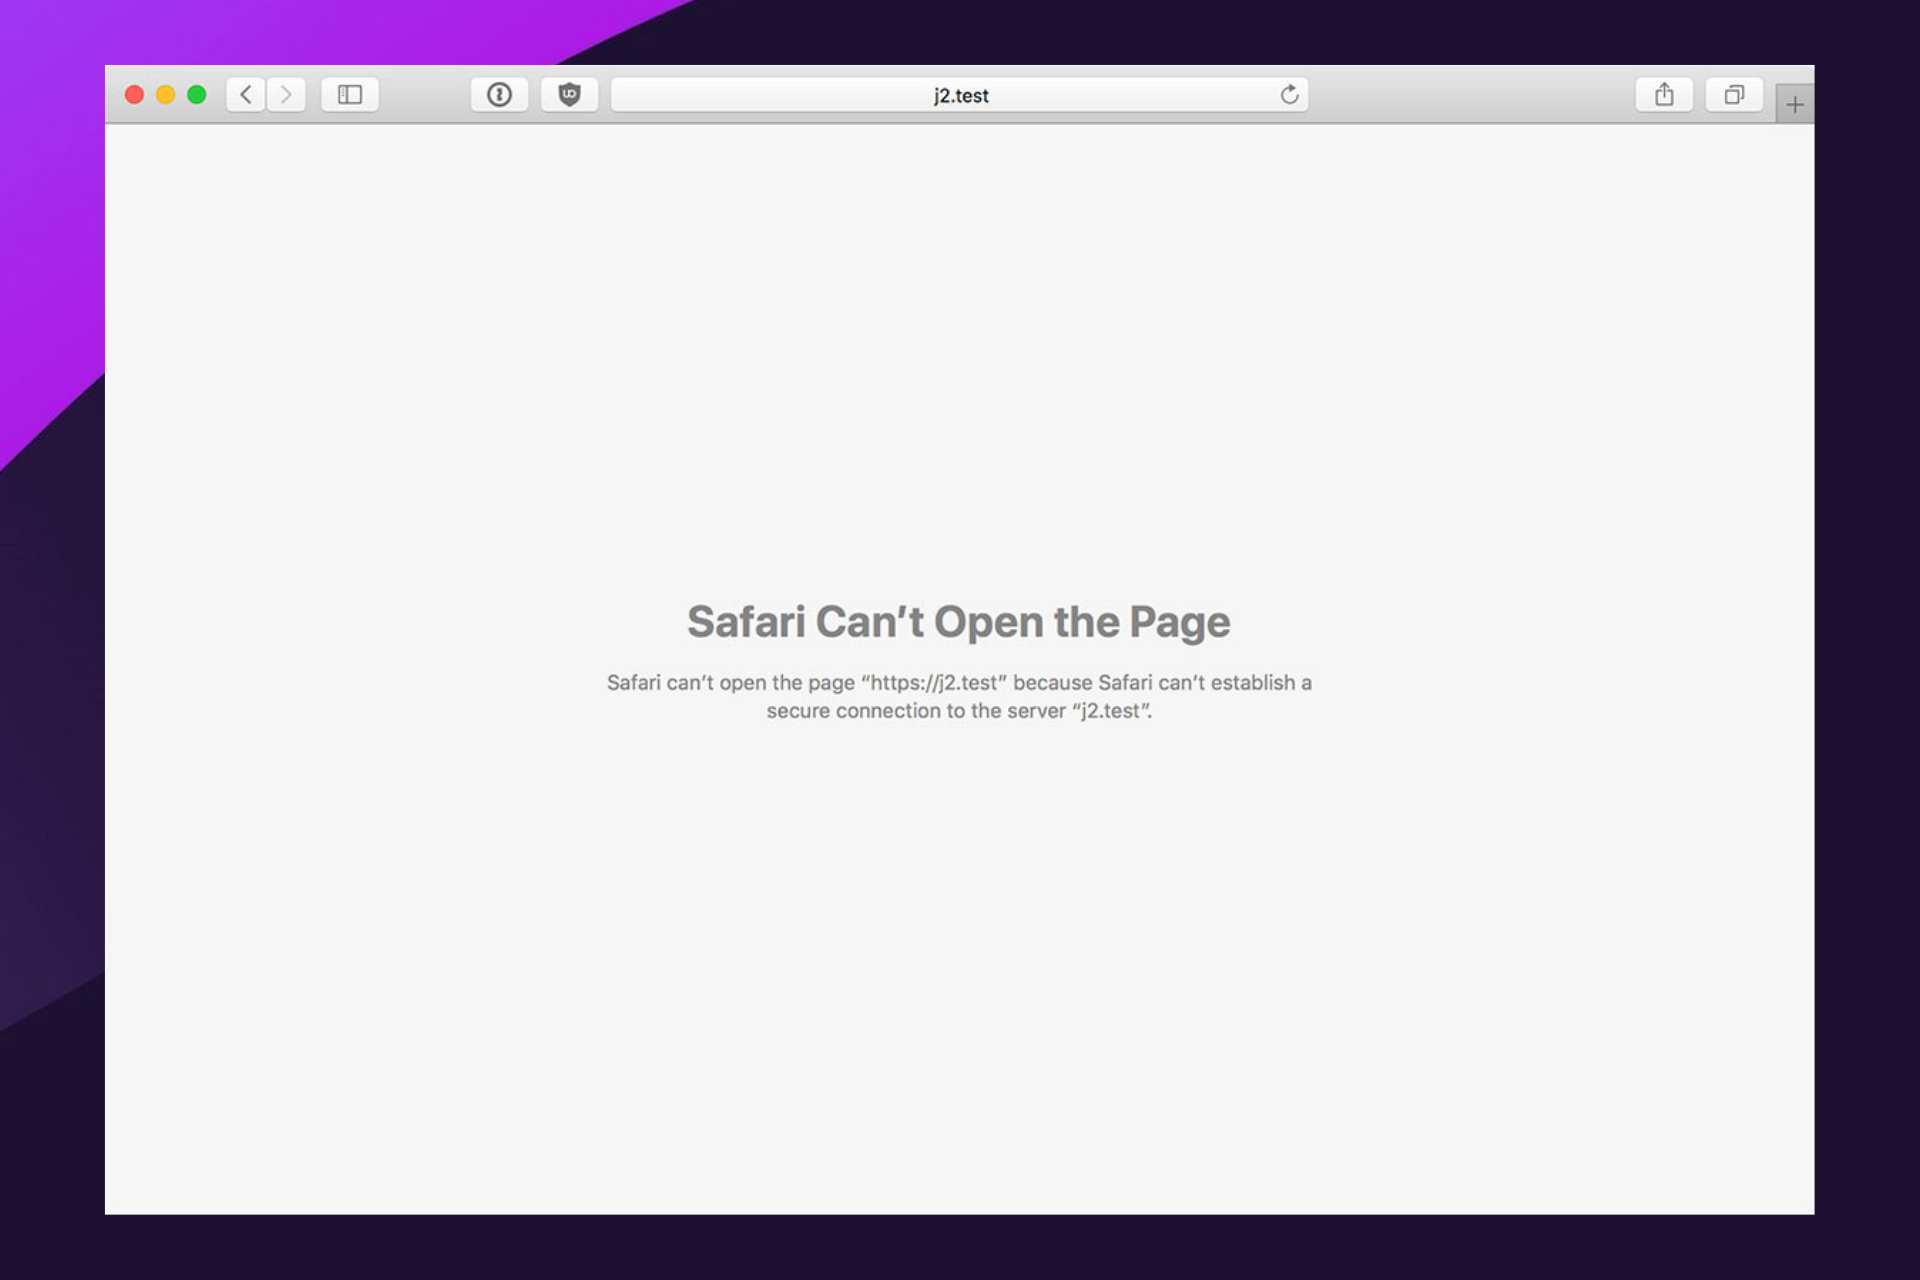 safari couldn't open page because server stopped responding